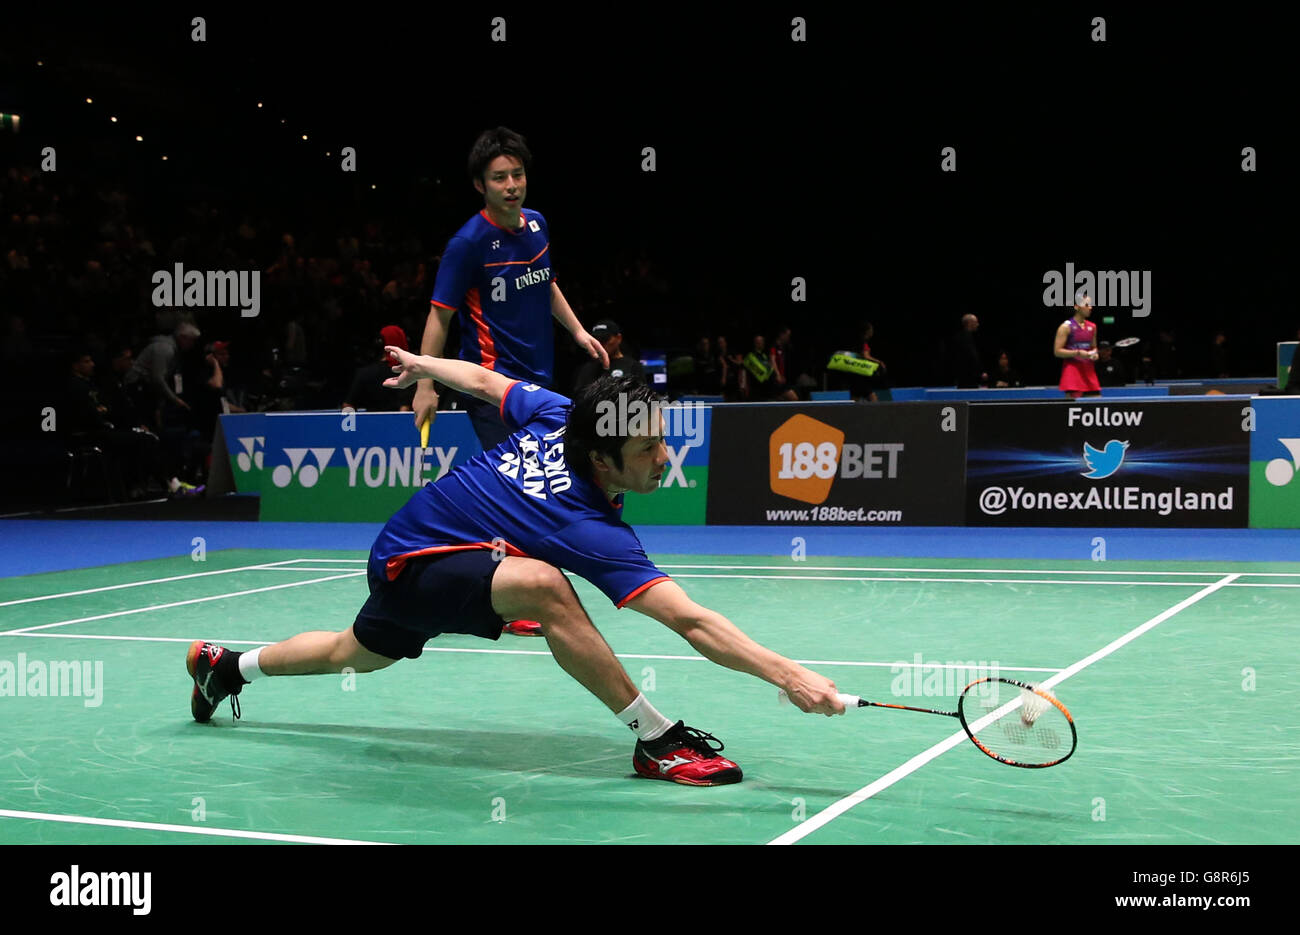 Japan's Kenichi Hayakawa (front) and Hiroyuki Endo during there doubles match during day two of the YONEX All England Open Badminton Championships at the Barclaycard Arena, Birmingham. PRESS ASSOCIATION Photo. Picture date: Thursday March 10, 2016. See PA story BADMINTON All England. Photo credit should read: Simon Cooper/PA Wire. Stock Photo